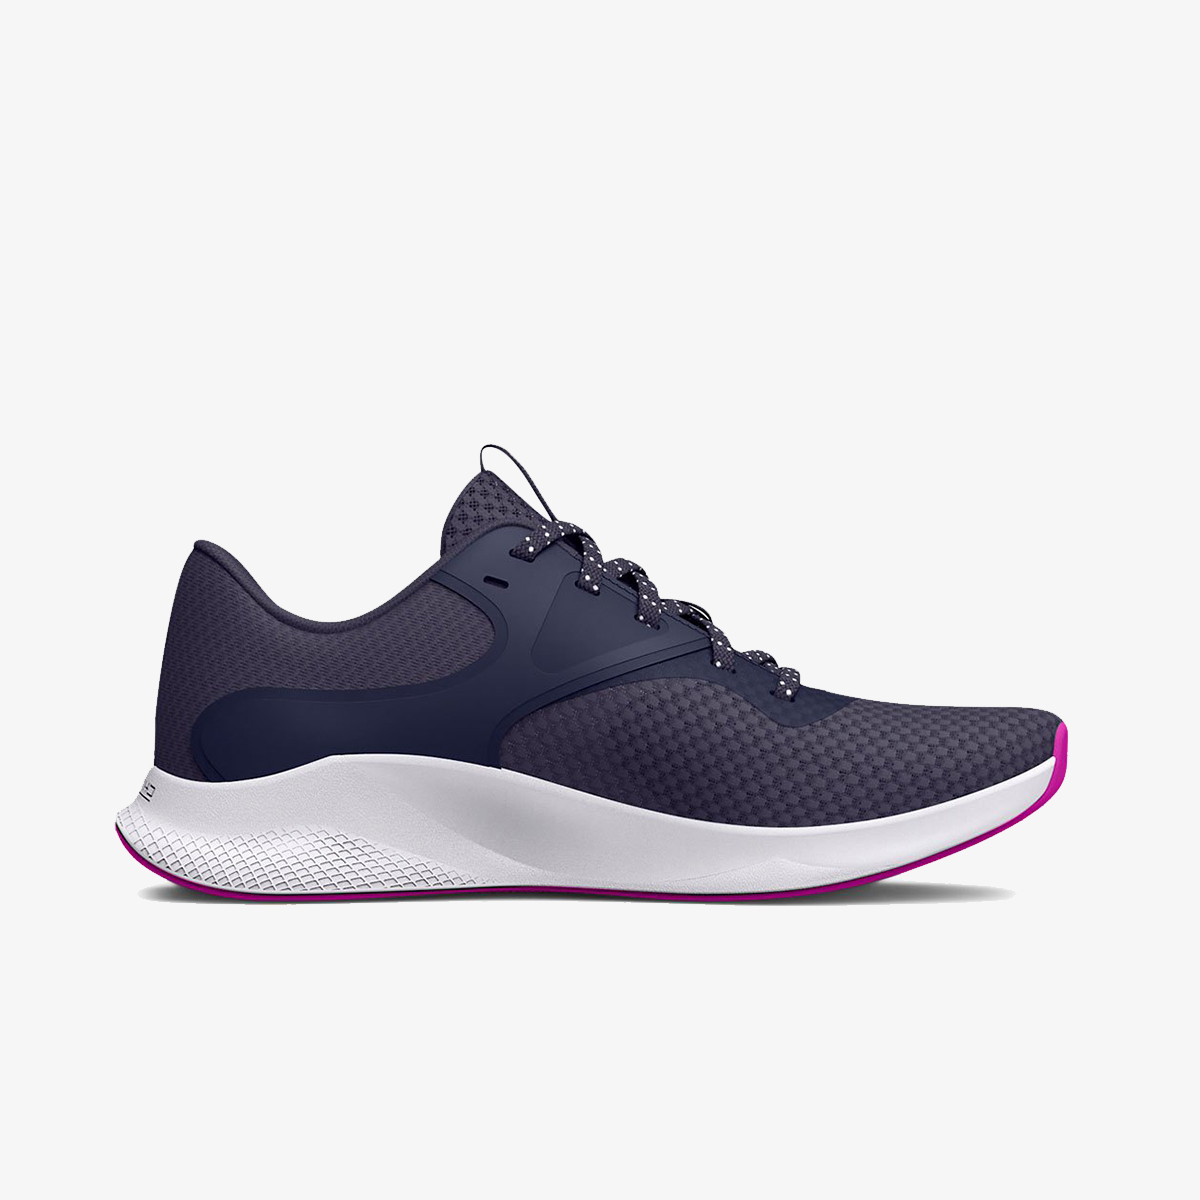 Under Armour Charged Aurora 3 